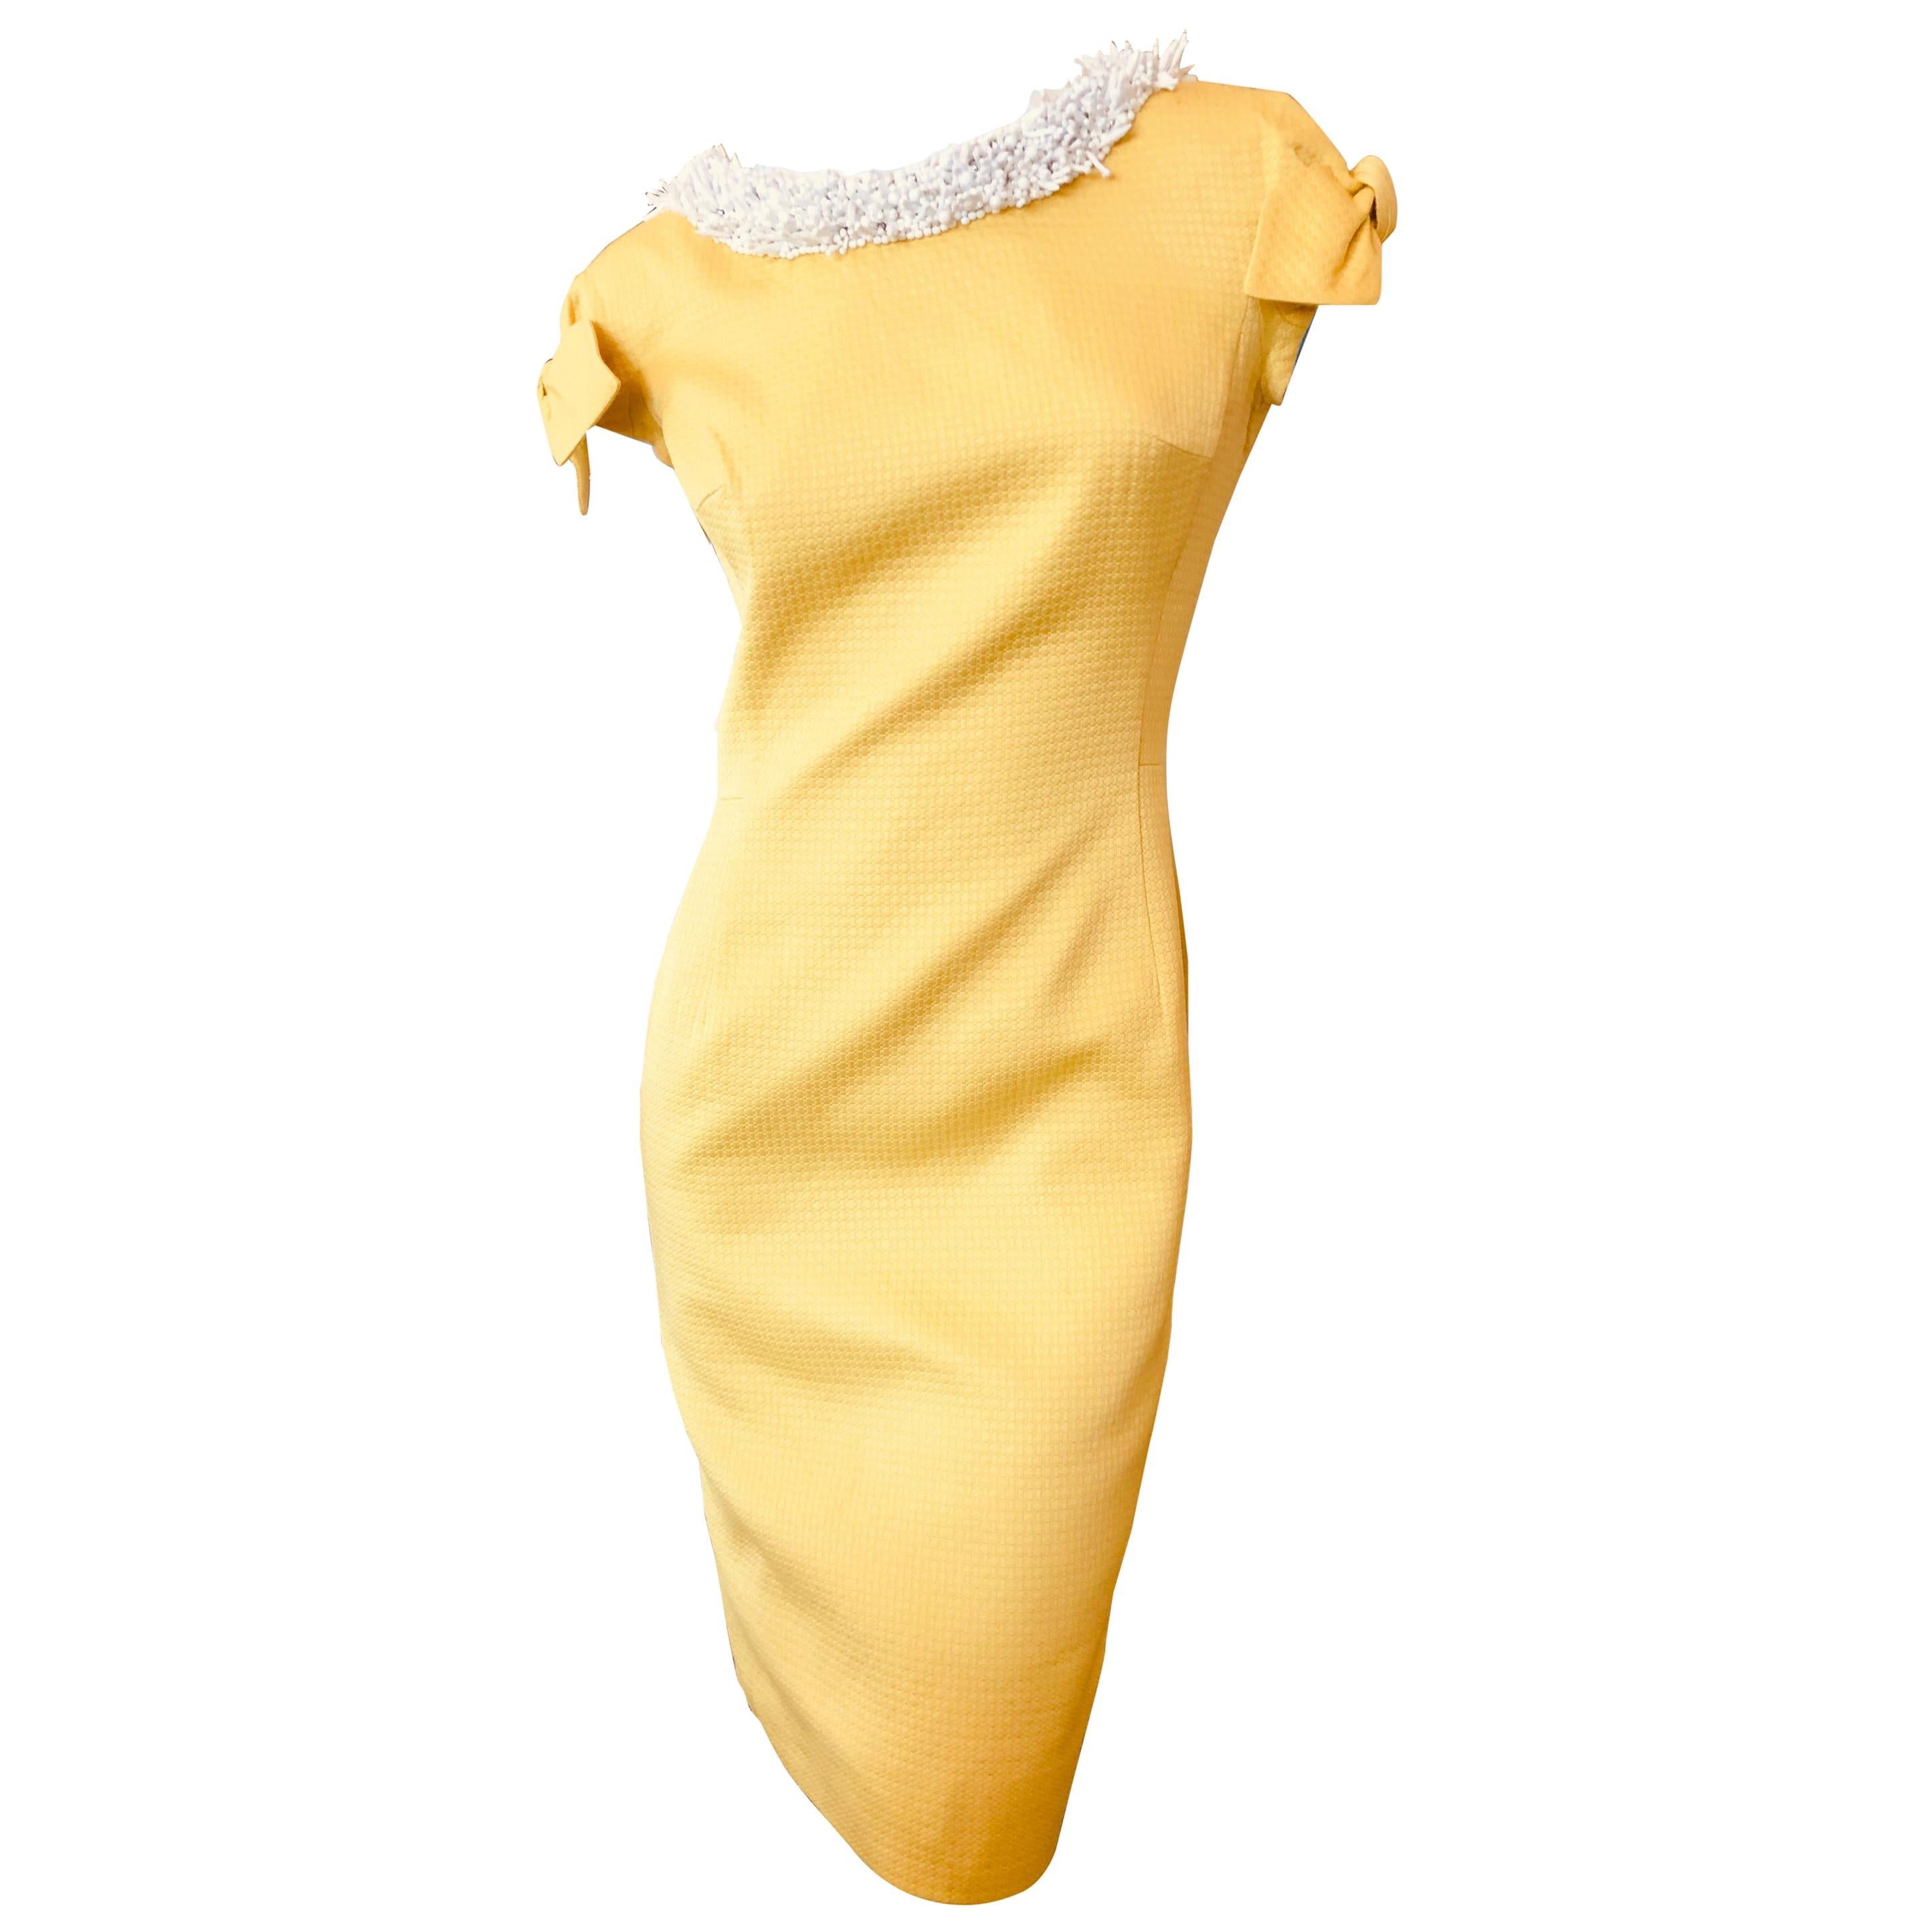 Christian Dior by John Galliano '99 Yellow Day Dress with Bows and Beaded Collar For Sale